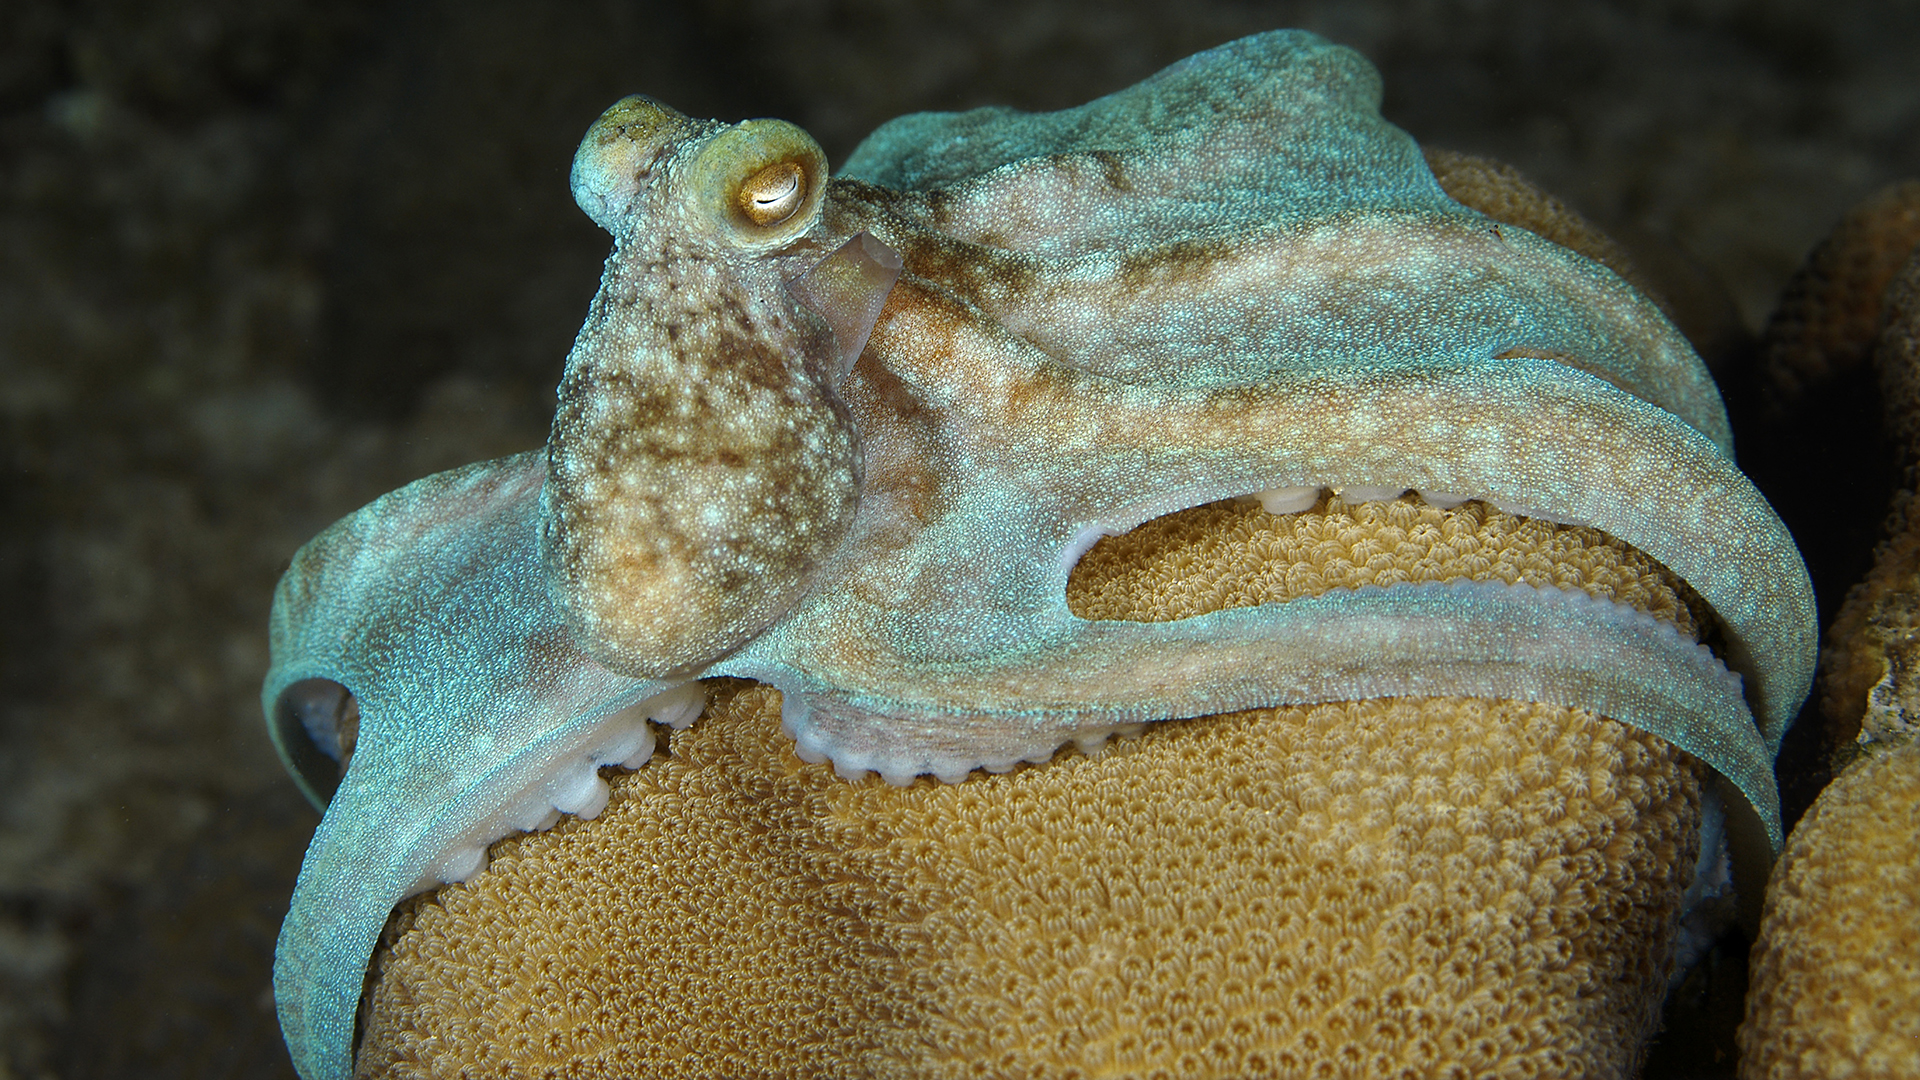 Here we see a greenish-brown octopus on a coral reef at night.